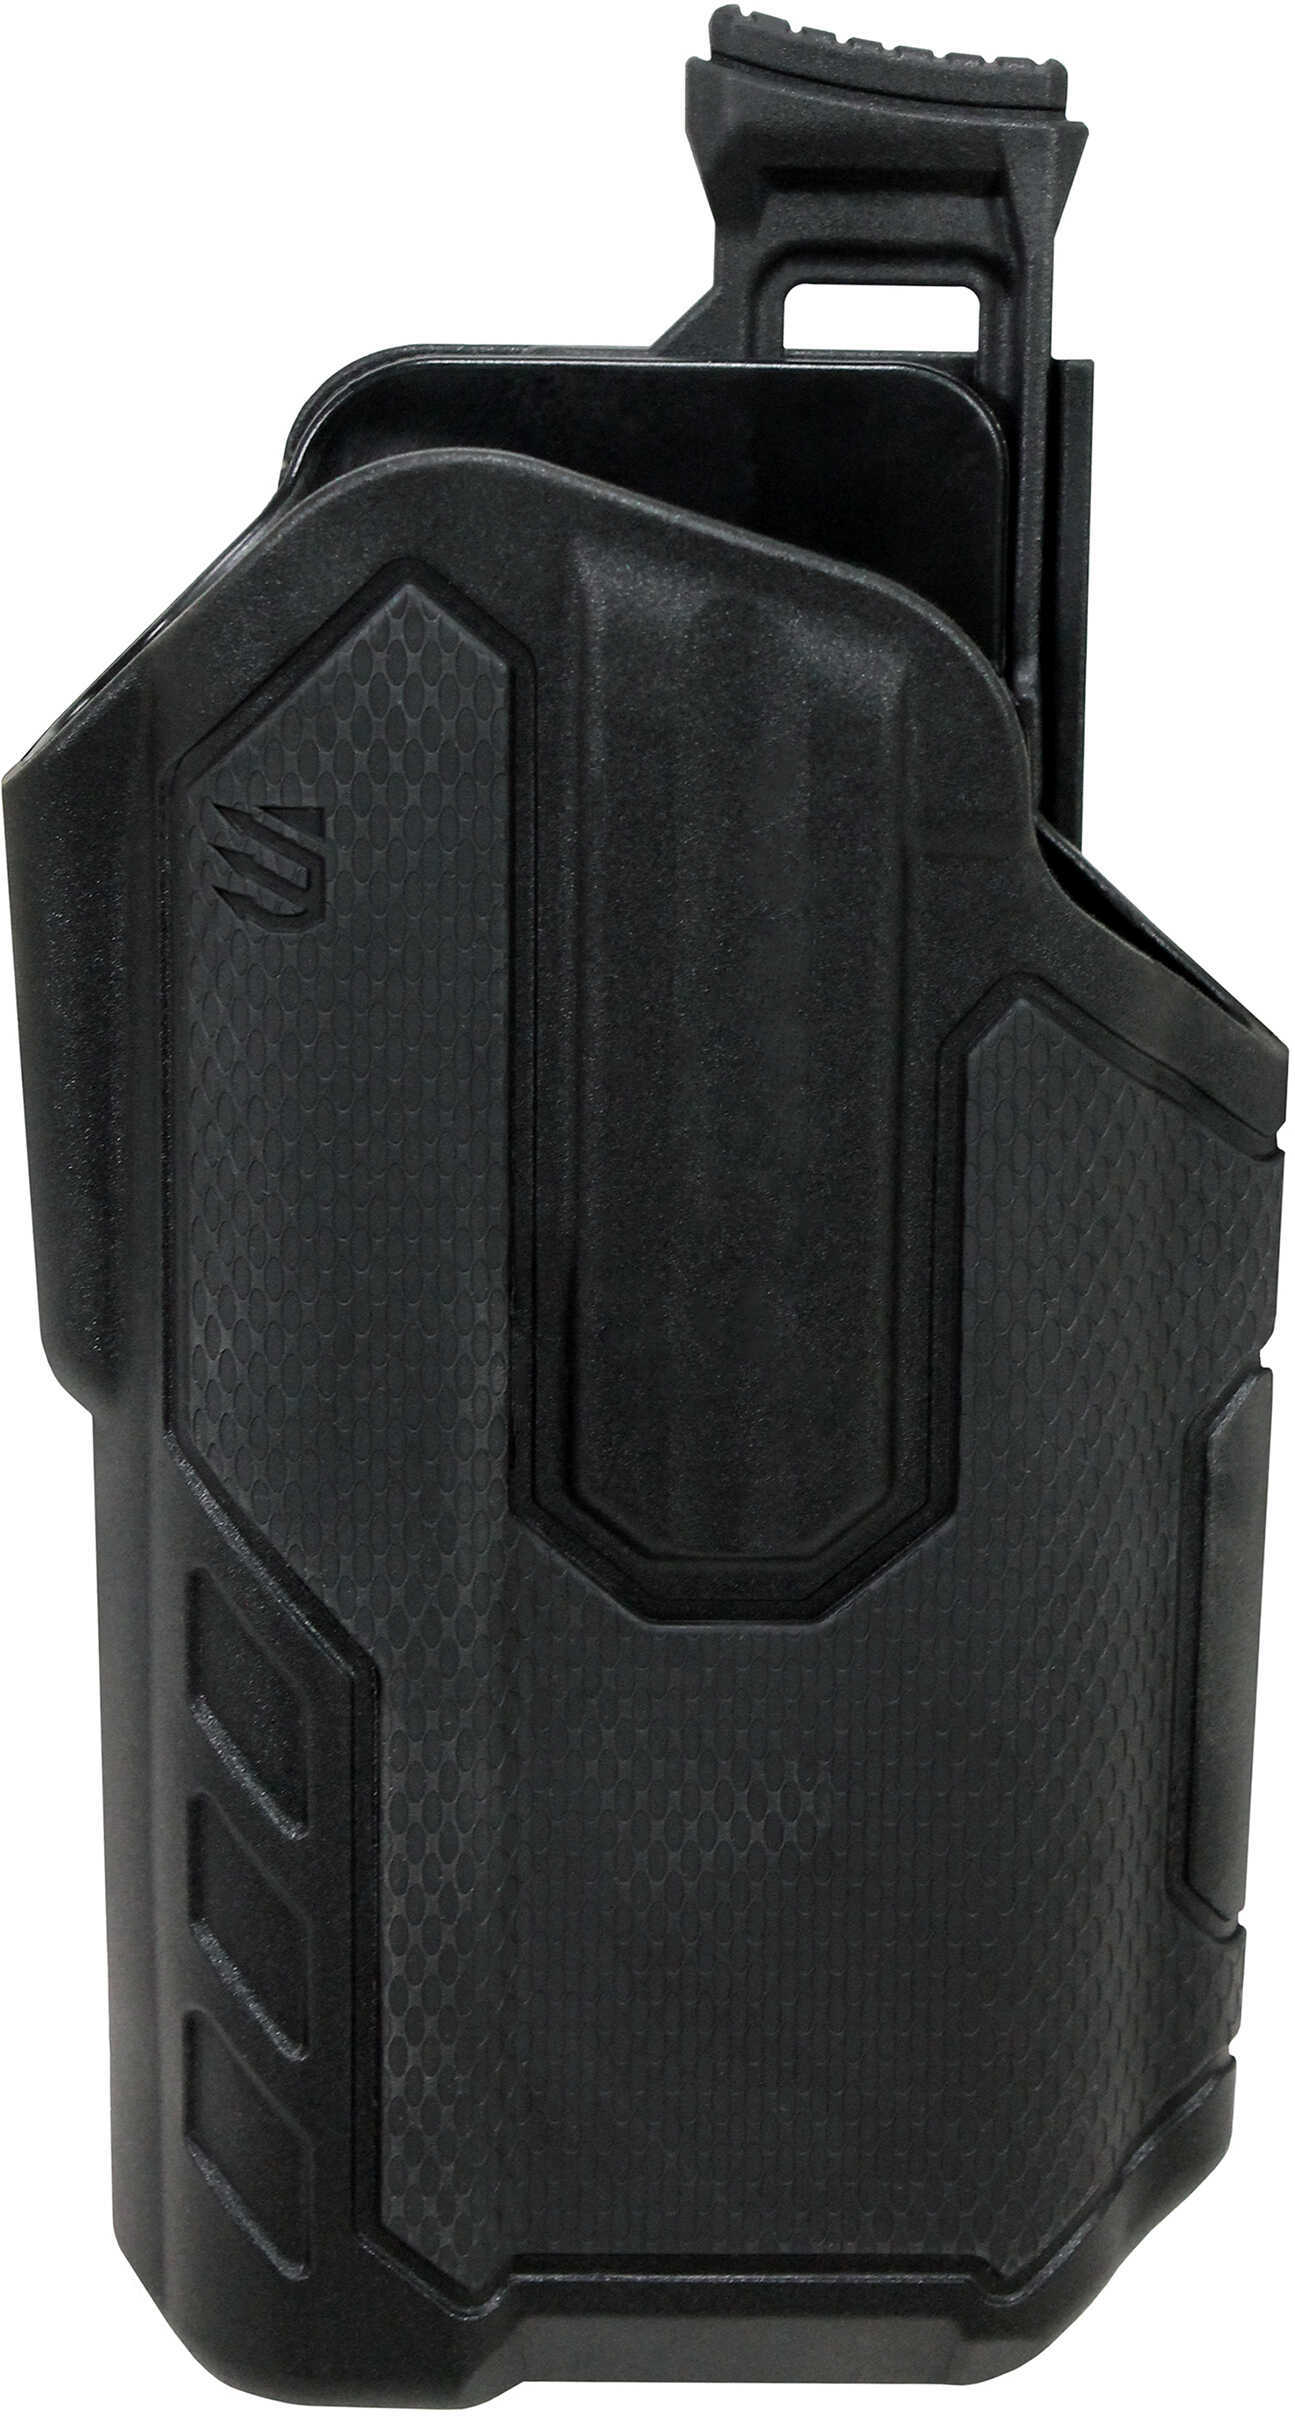 BLACKHAWK! Omnivore L2 Multi-Fit Holster Fits More Than 150 Styles of Semi-Automatic Handguns with Surefire X300 Thumb A